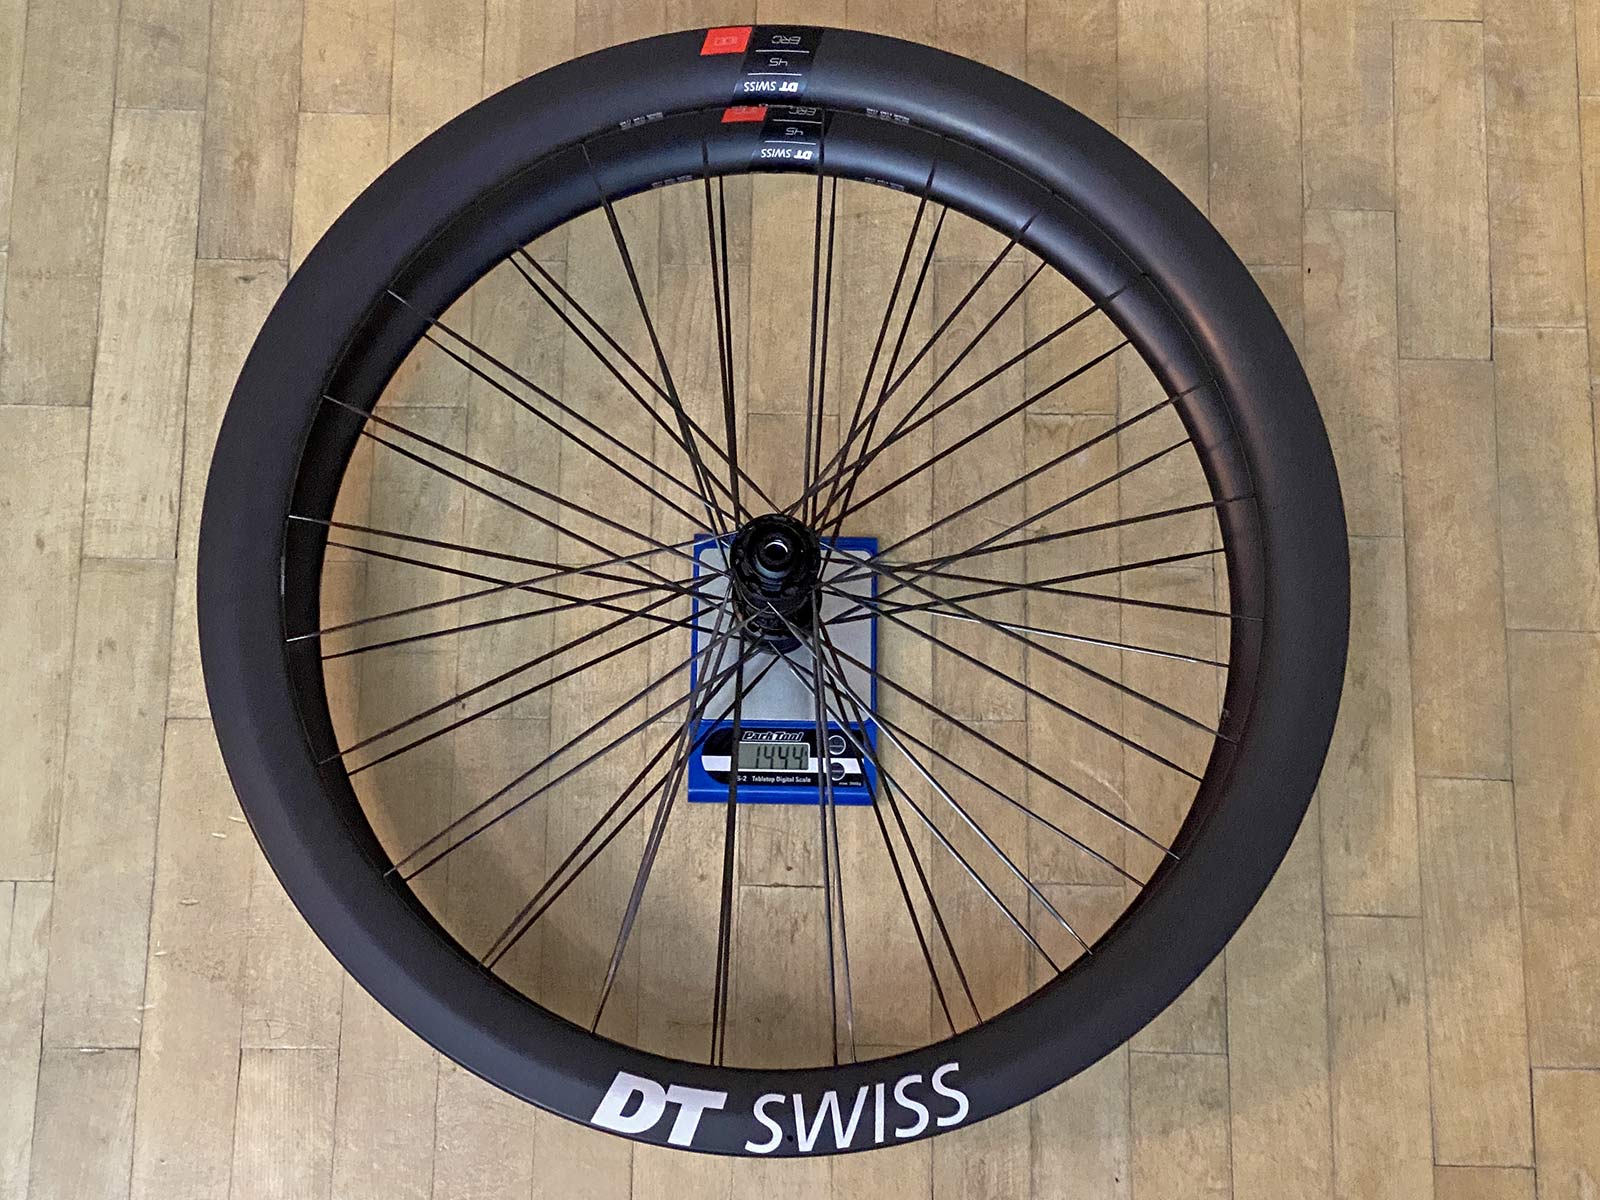 DT Swiss ERC carbon Aero road bike wheels, reshaped aerodynamic all-rounder all-road wheelset, 1444g actual weight